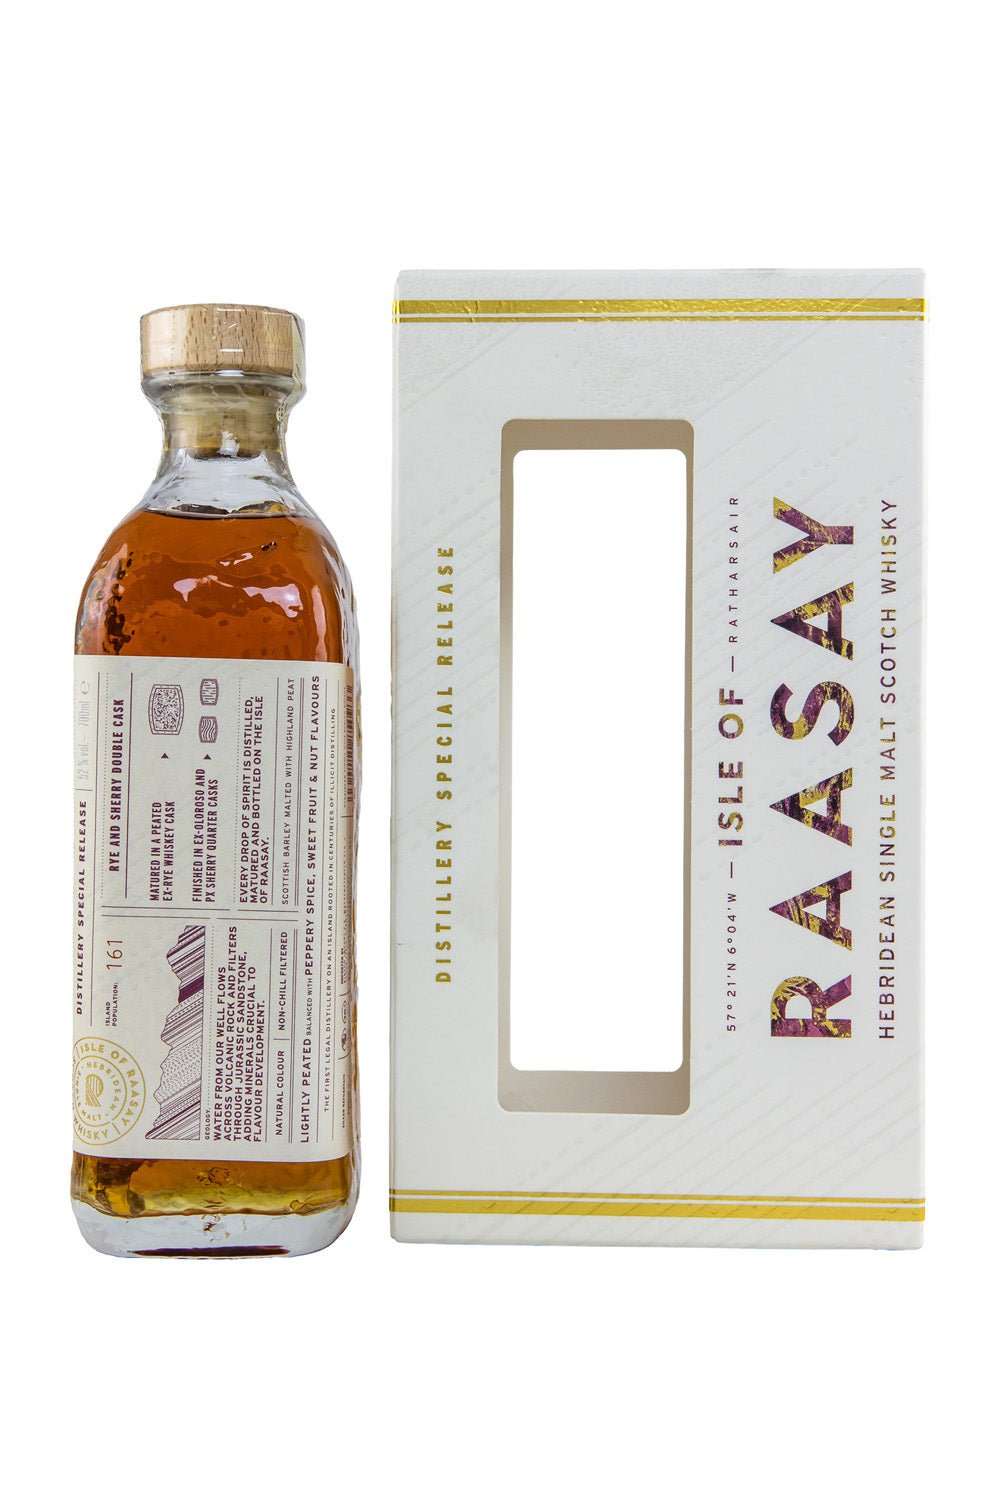 Isle of Raasay Destillery Special Release Sherry Finish 52% 700ml - Maltimore